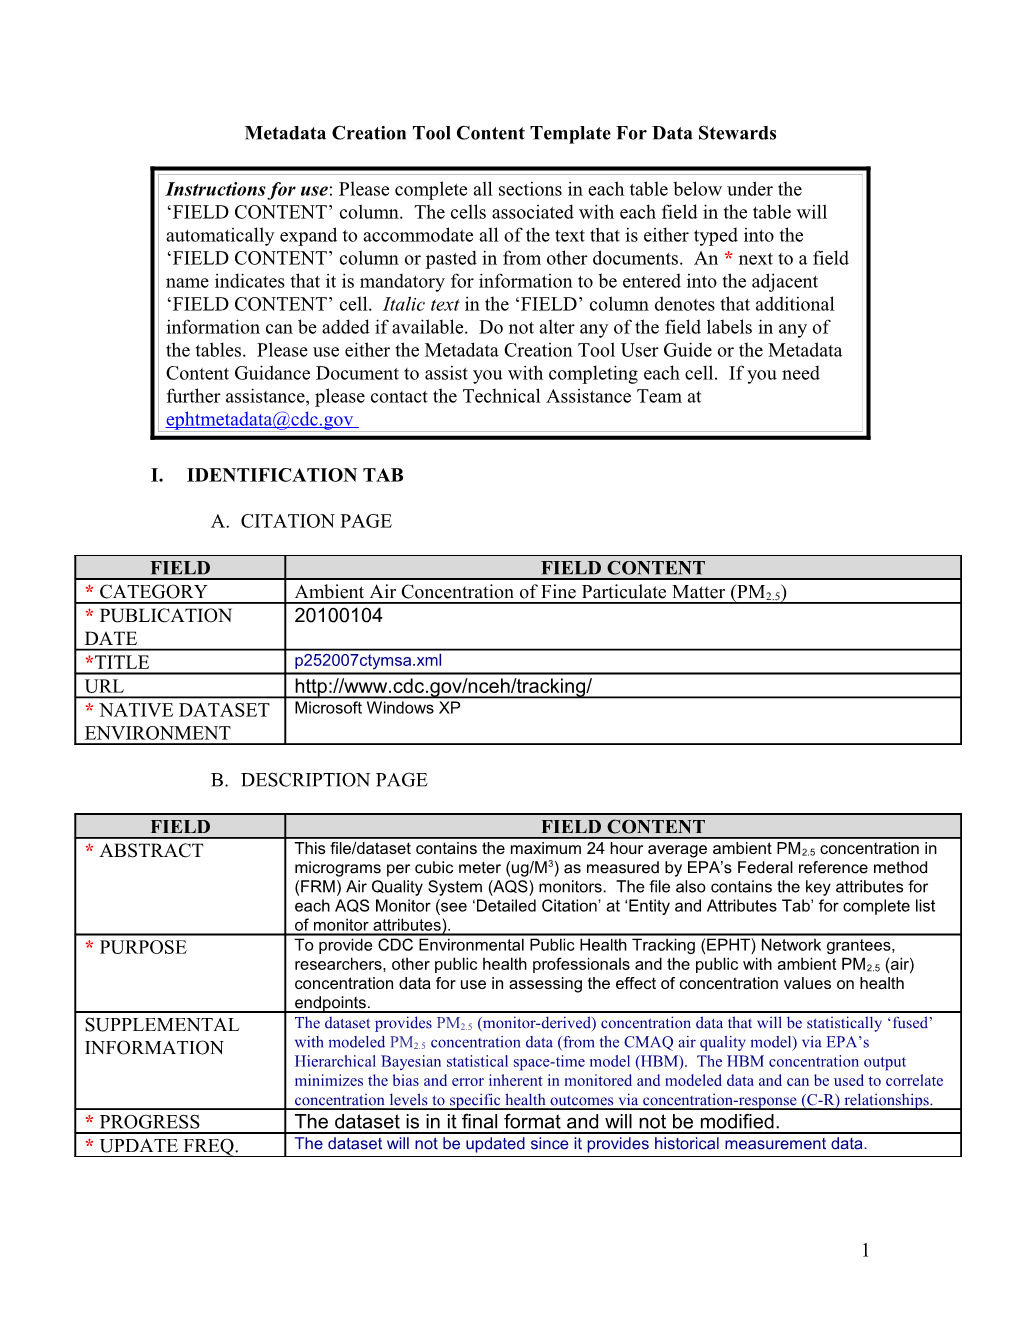 Metadata Creation Tool Content Template for Data Stewards